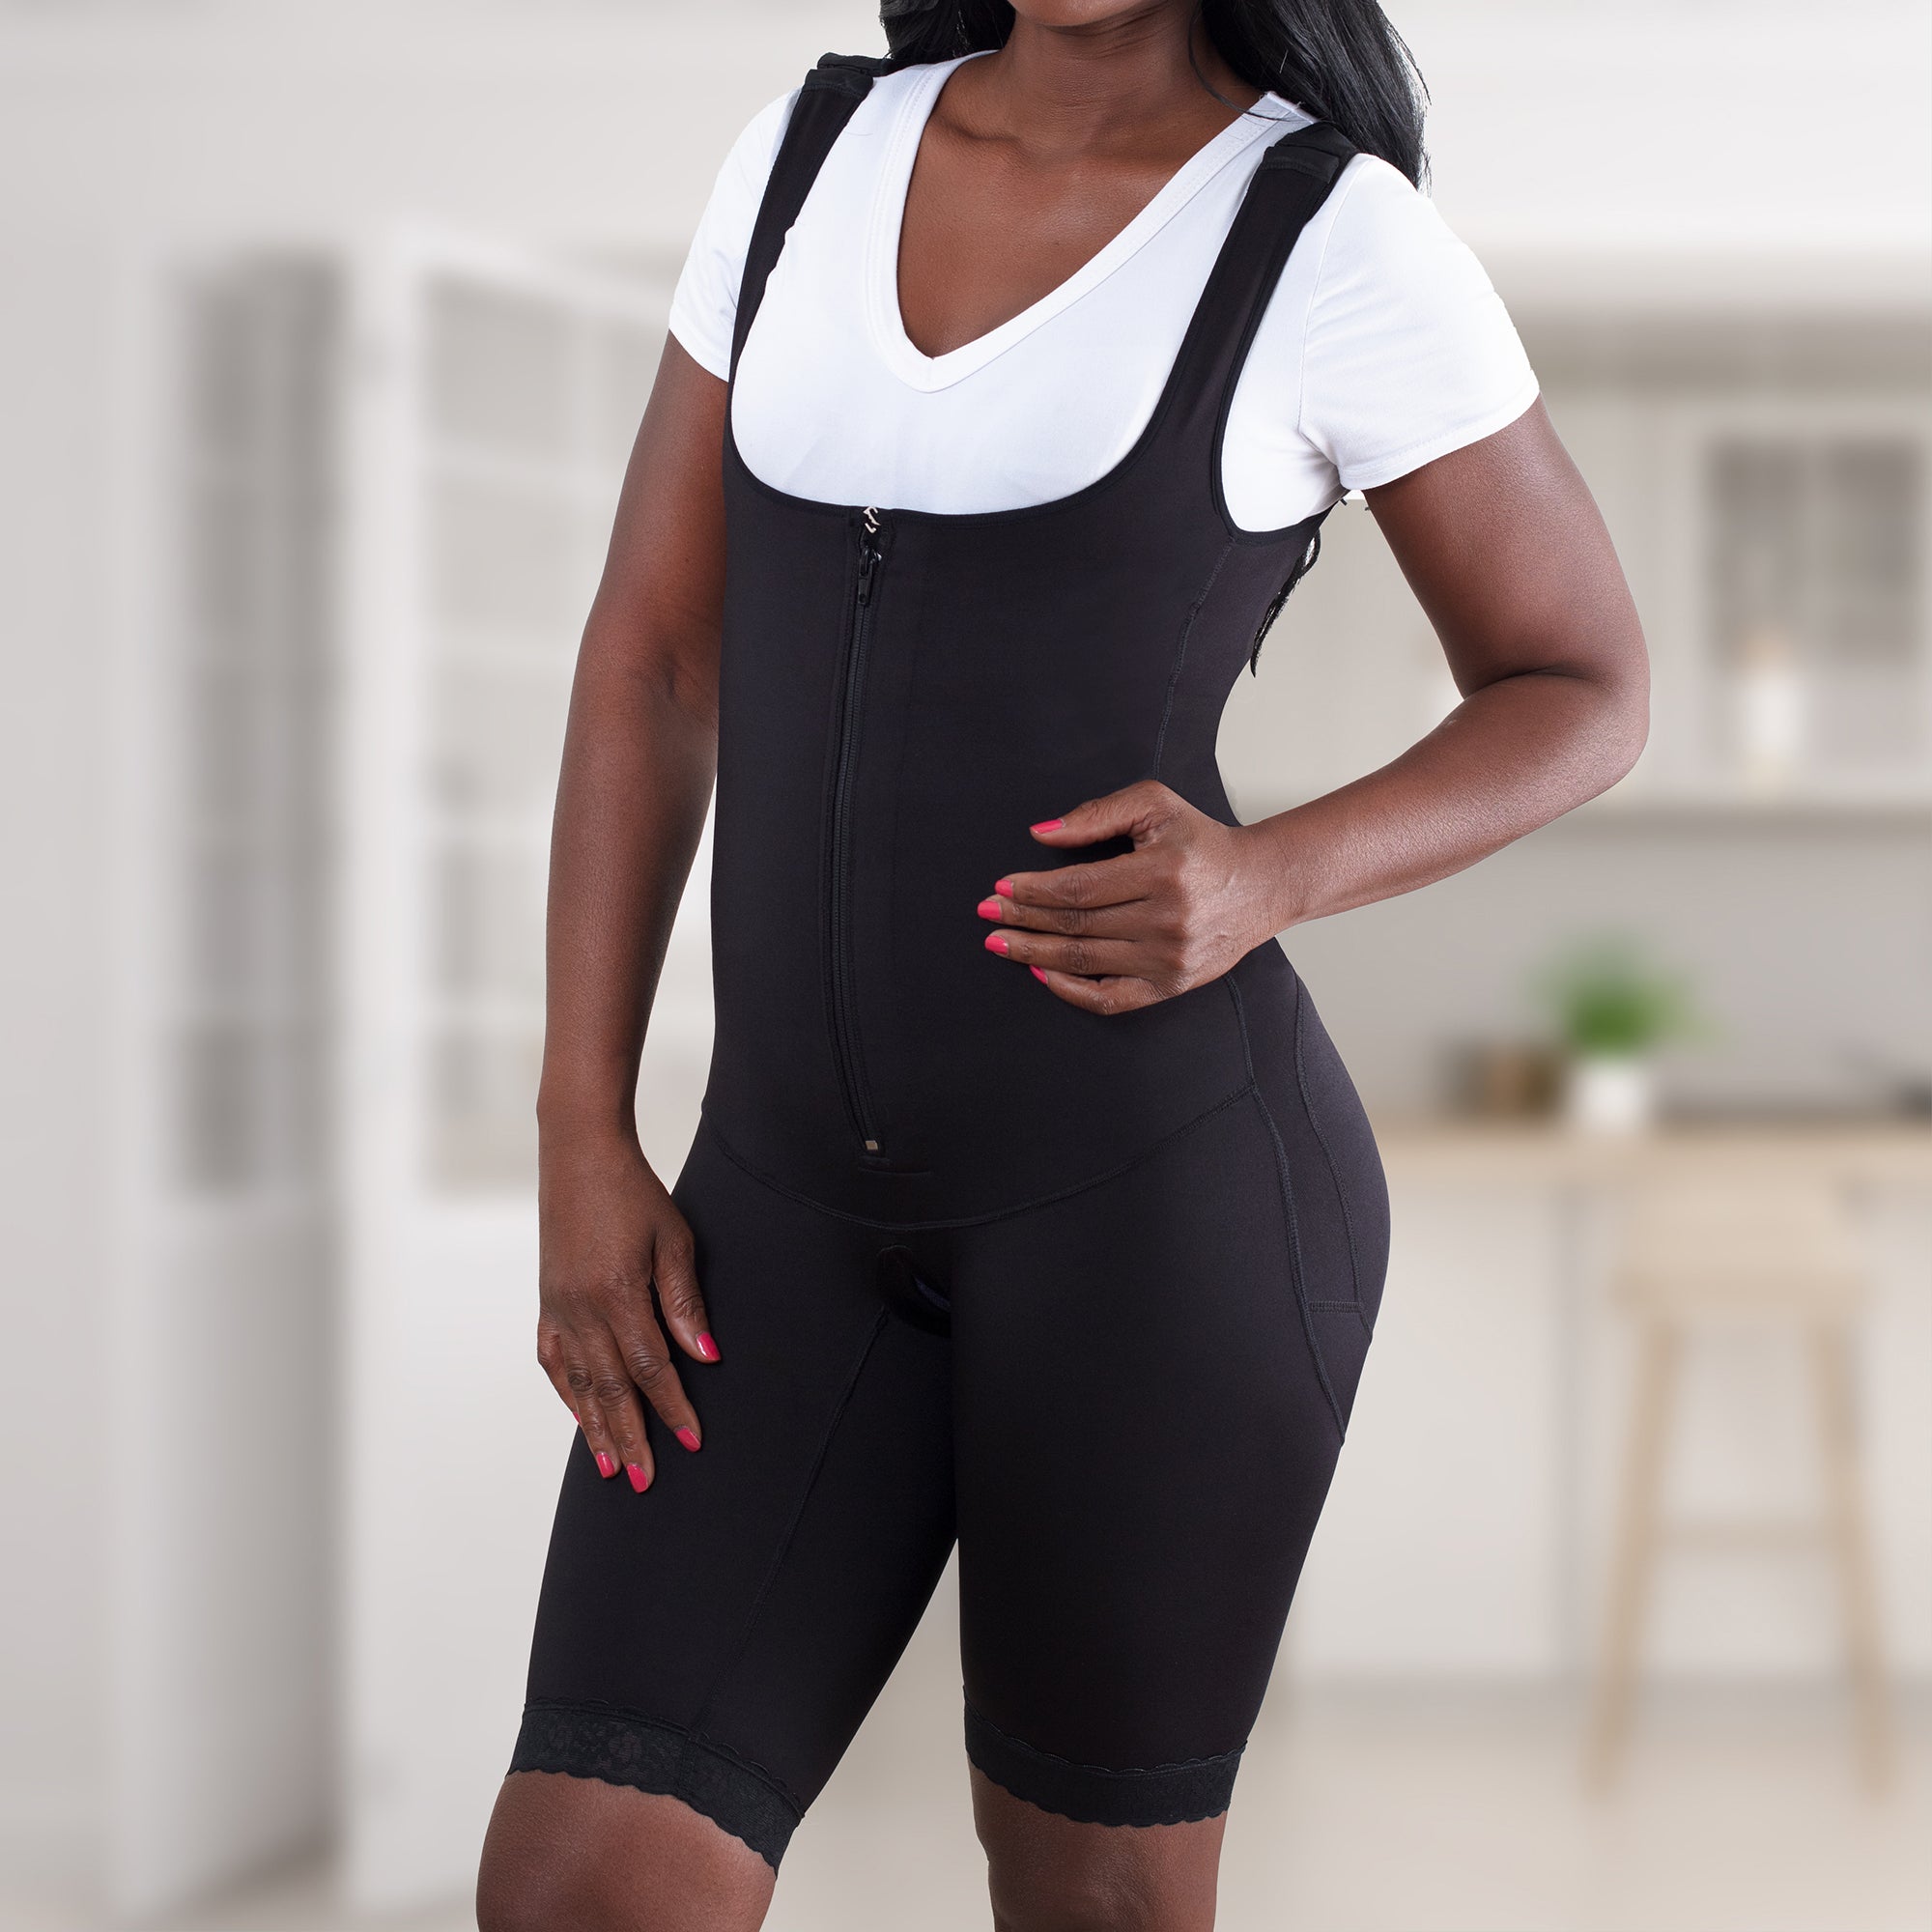 Black, mid-thigh compression body suit - front